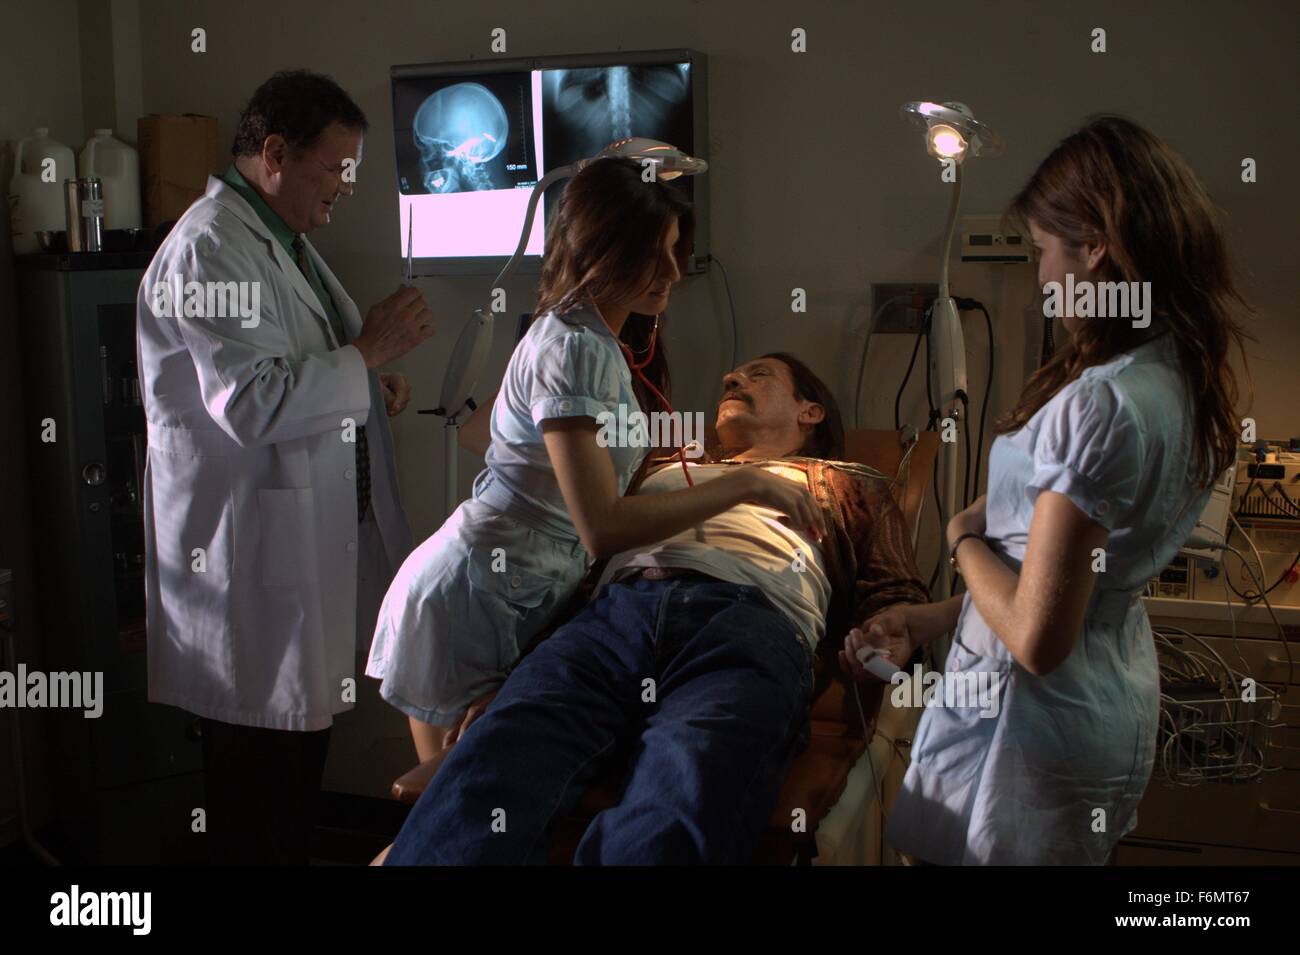 RELEASE DATE: 3 September 2010. TITLE: Machete. STUDIO: Troublemaker Studios. PLOT: After being betrayed by the organization who hired him, an ex-Federale launches a brutal rampage of revenge against his former boss. PICTURED: DANNY TREJO as Machete with ELECTRA AVELLAN as Nurse Mona, ELISE AVELLAN as Nurse Lisa and FELIX SABATES as Doc Felix. Stock Photo